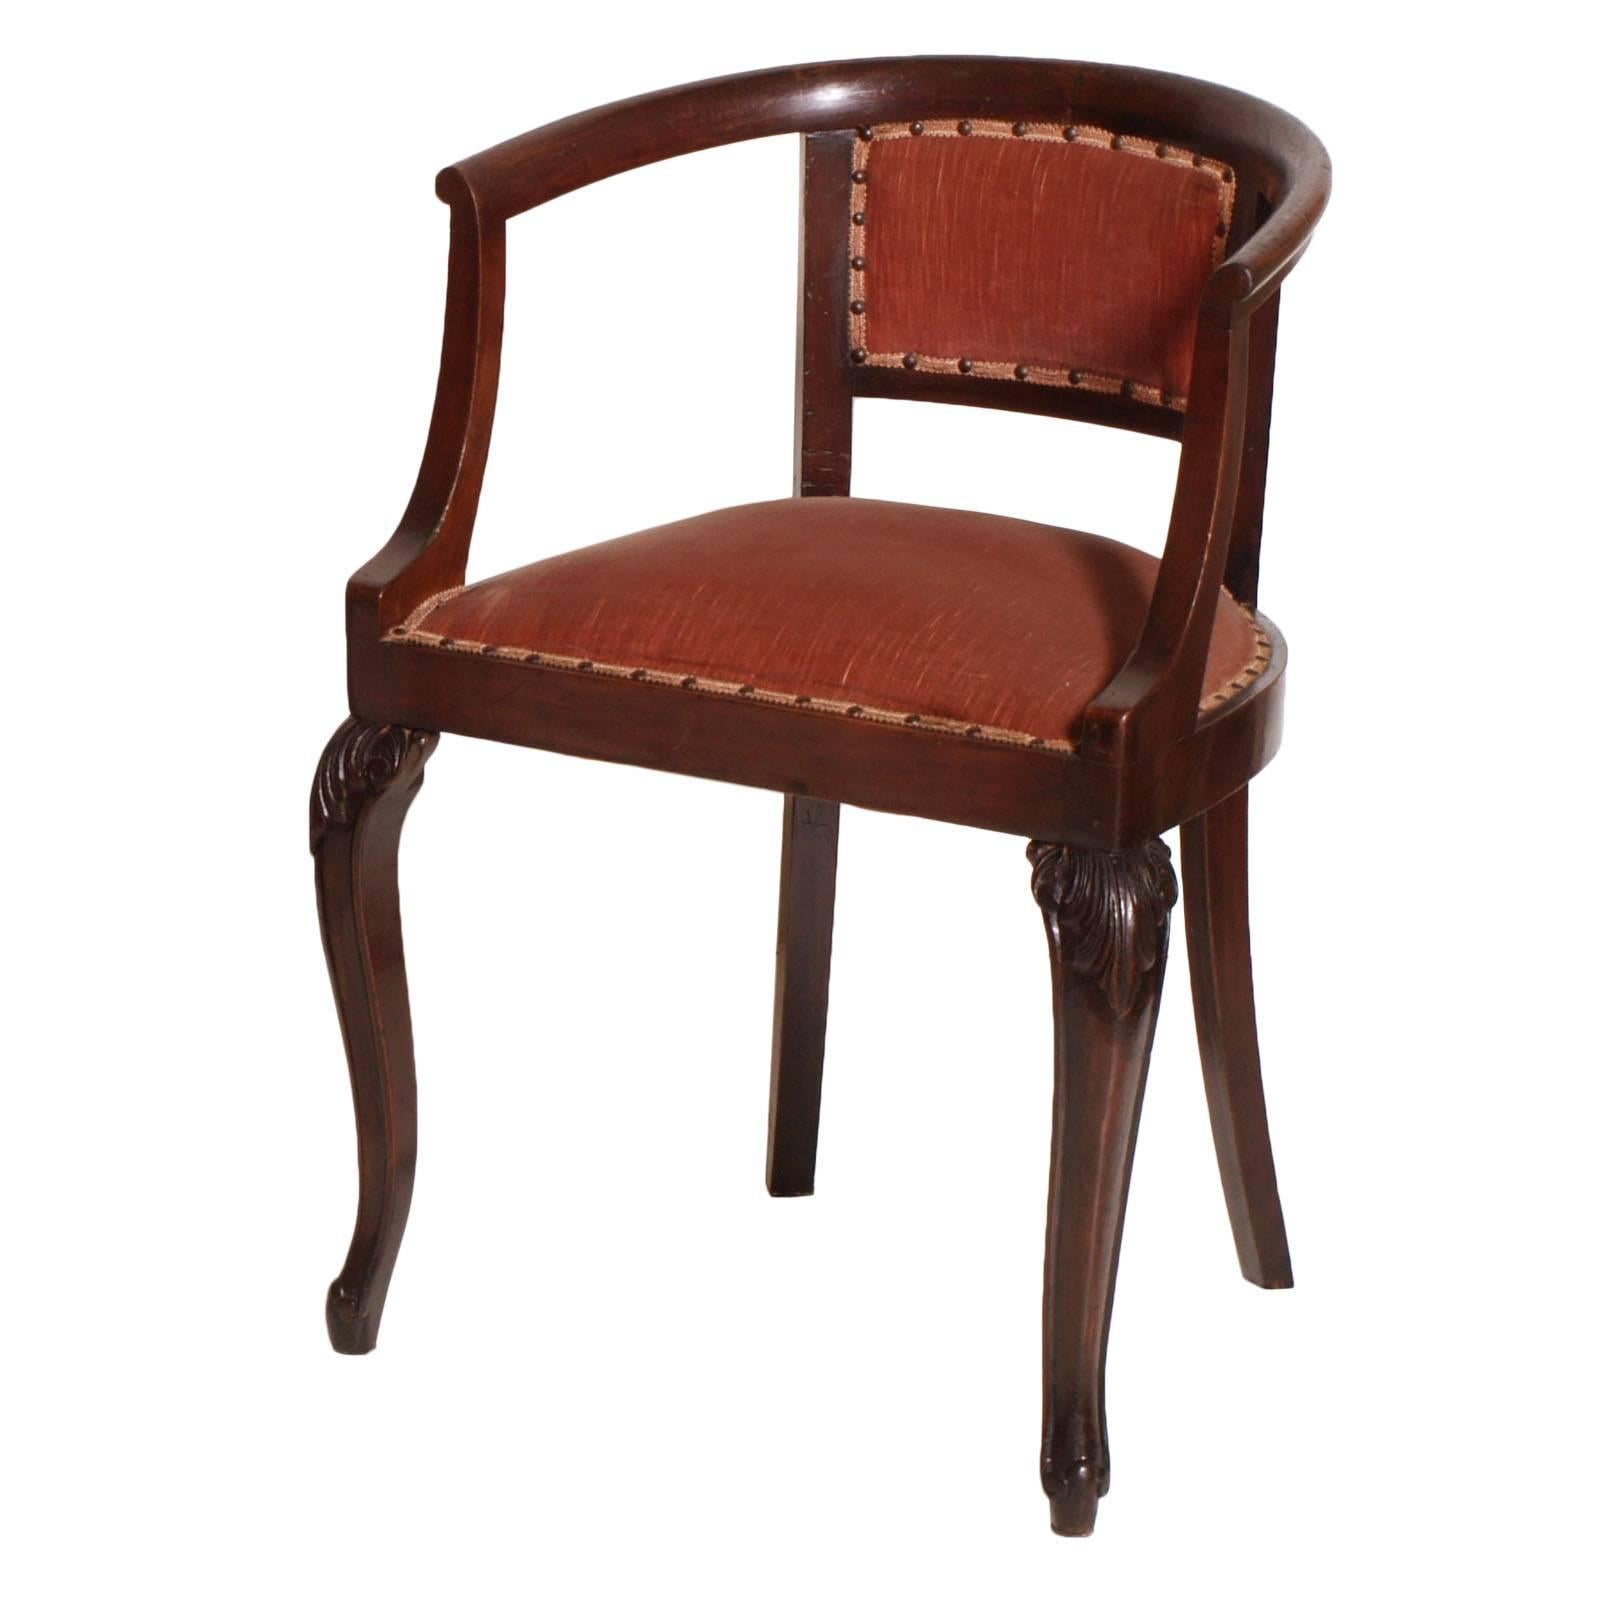 1910s Art Nouveau pair of Pozzeto Chairs, finally hand-carved walnut, original venetian fabric in coral red velvet
Measures cm: H 80/45 W 55 D 45.